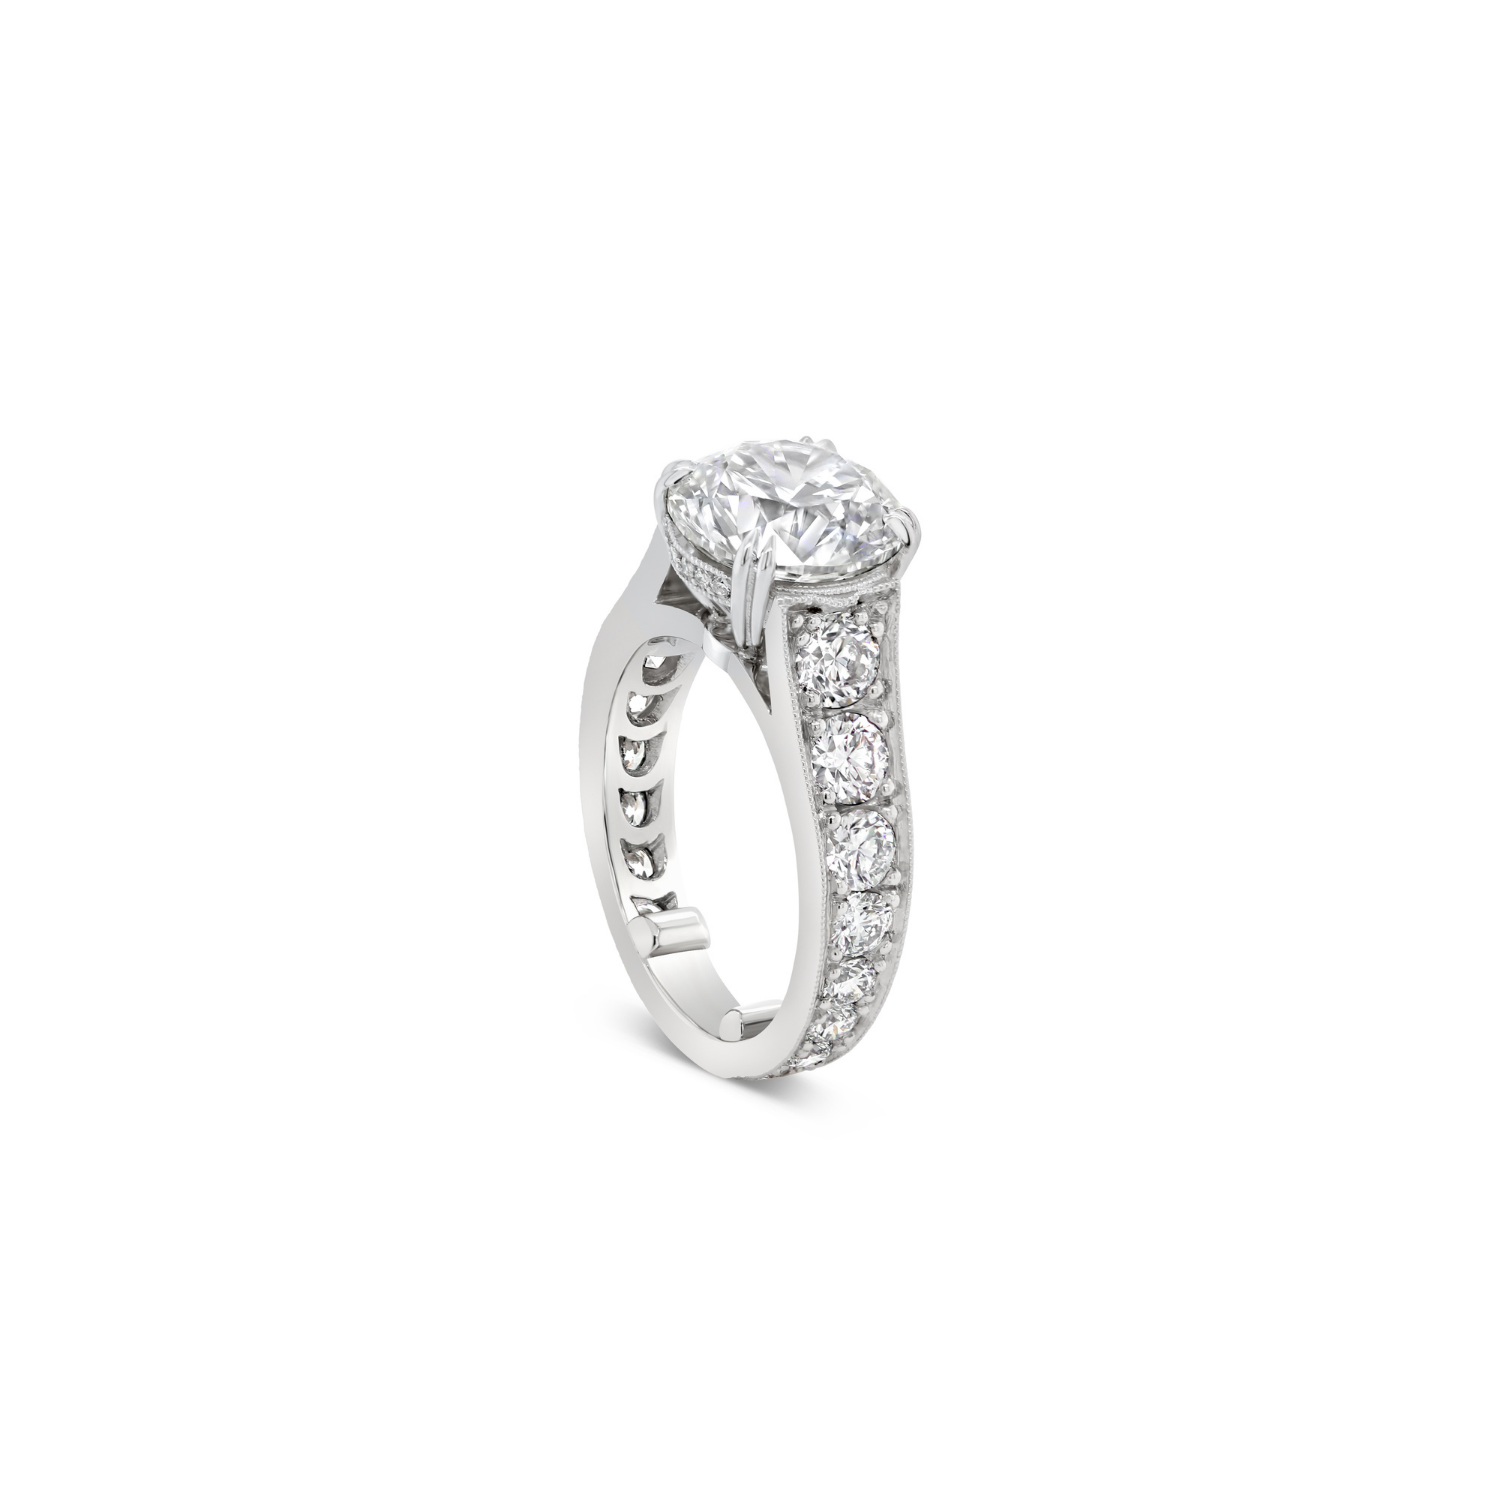 Round Brilliant Cut Diamond & Tapered Band Engagement Ring white gold